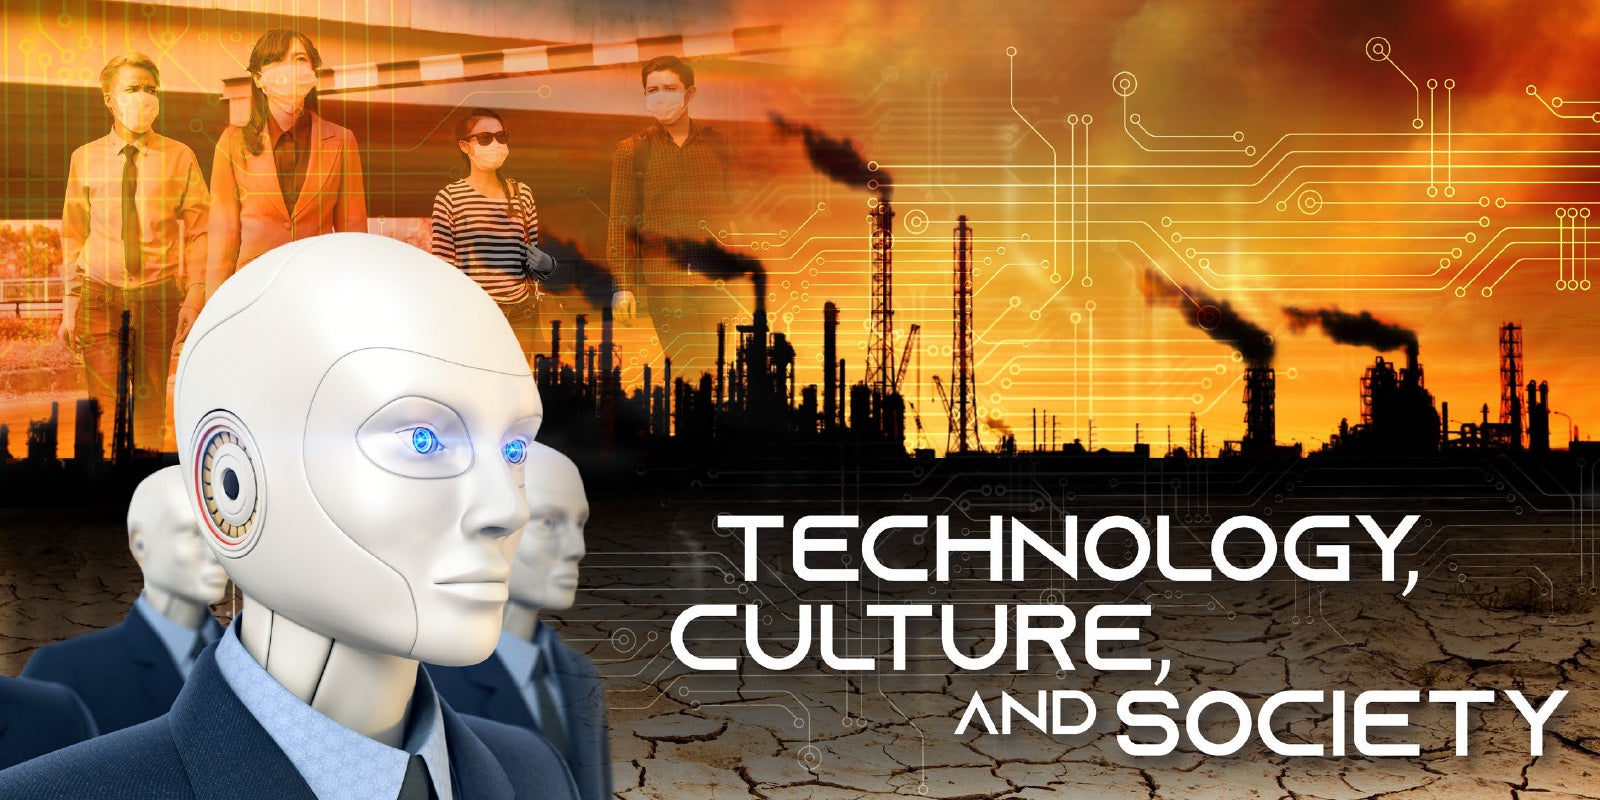 Moshe Vardi to host Kate Crawford's Technology, Culture, and Society Lecture